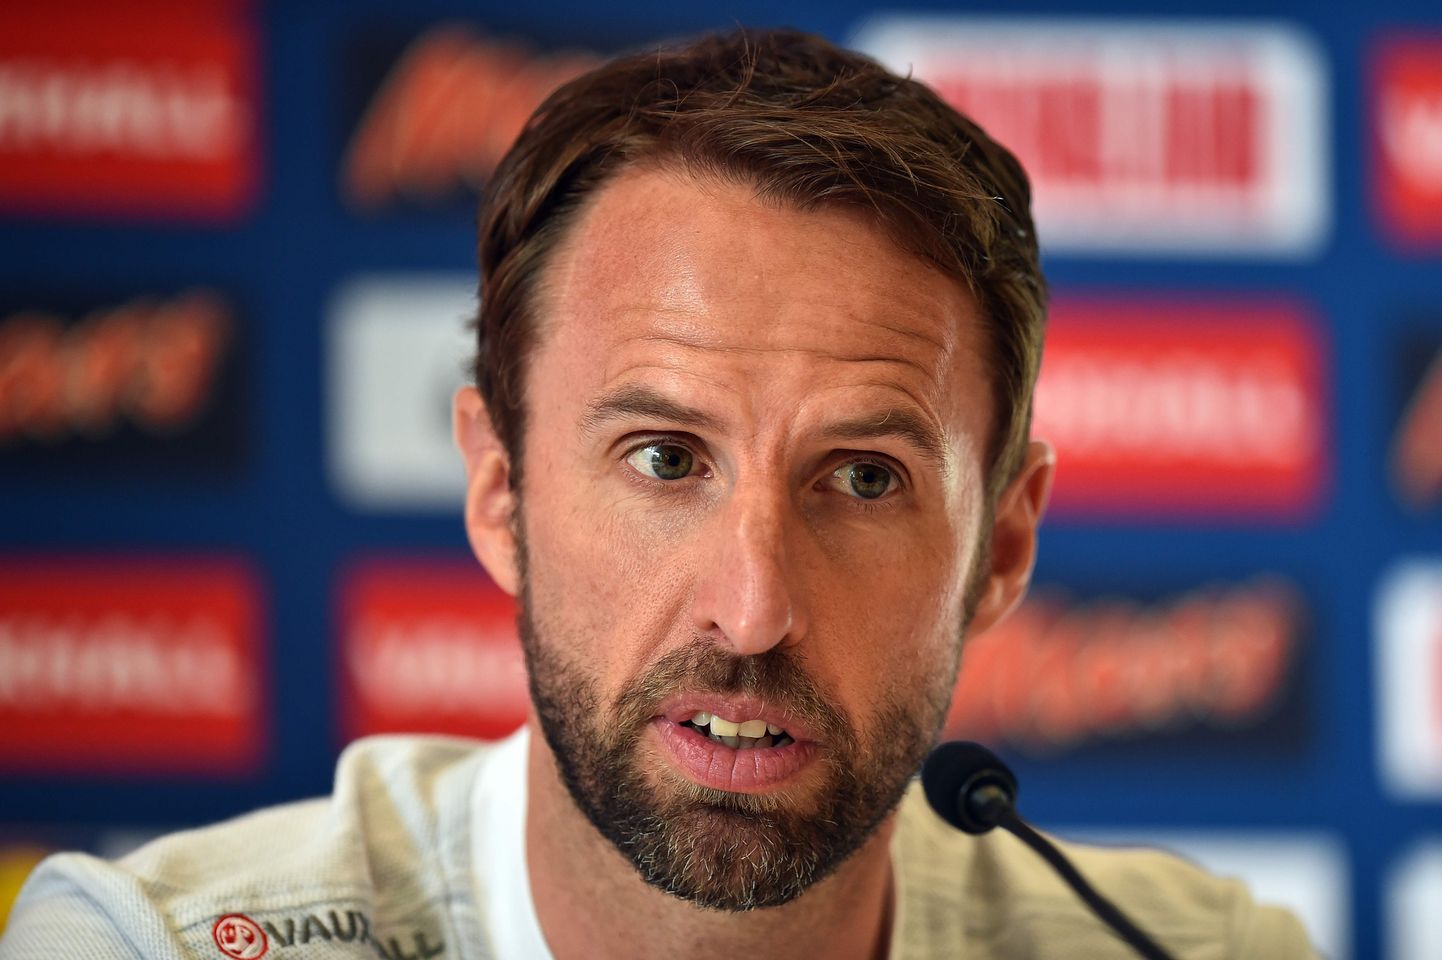 England manager Gareth Southgate takes part in a press conference at The Grove Hotel in Watford, north of London on June 1, 2018 on the eve of their friendly football match against Nigeria. / AFP PHOTO / GLYN KIRK / NOT FOR MARKETING OR ADVERTISING USE / RESTRICTED TO EDITORIAL USE